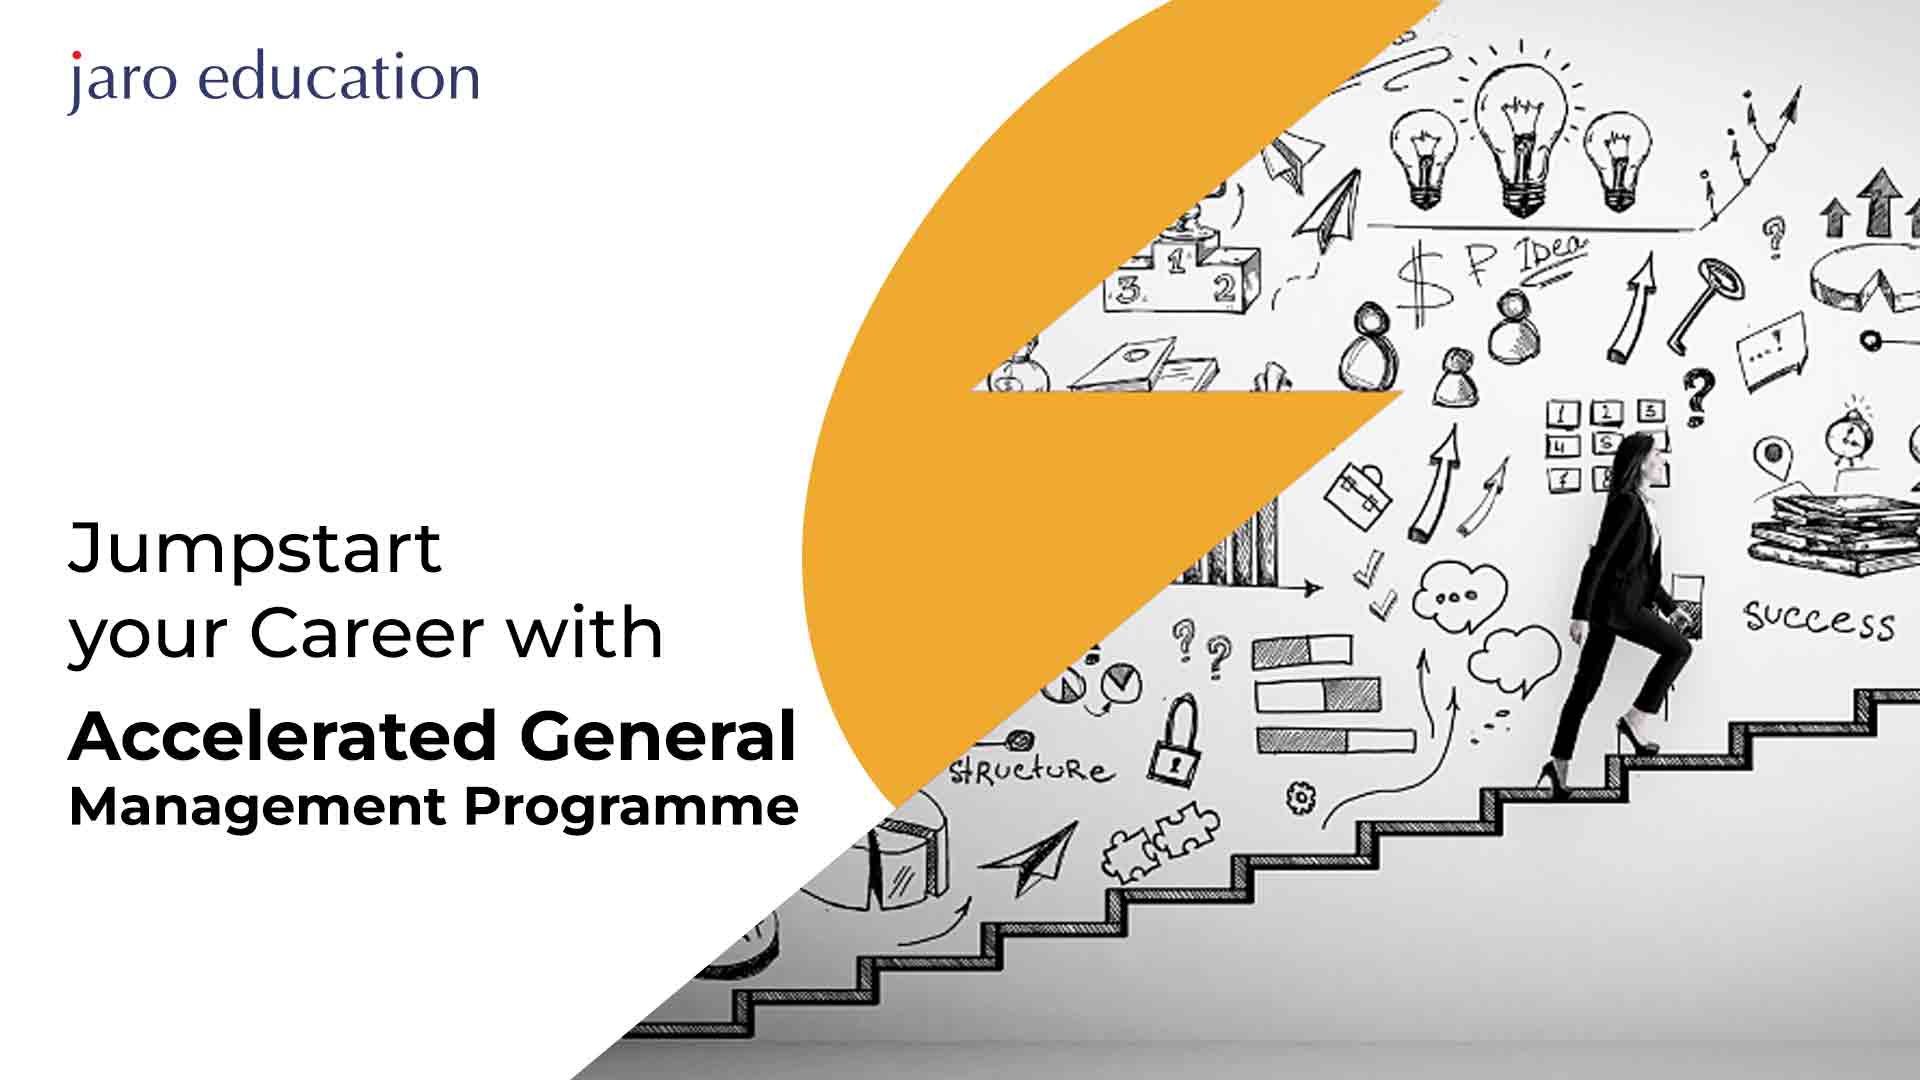 Jumpstart-your-Career-with-Accelerated-General-Management-Programme jaro